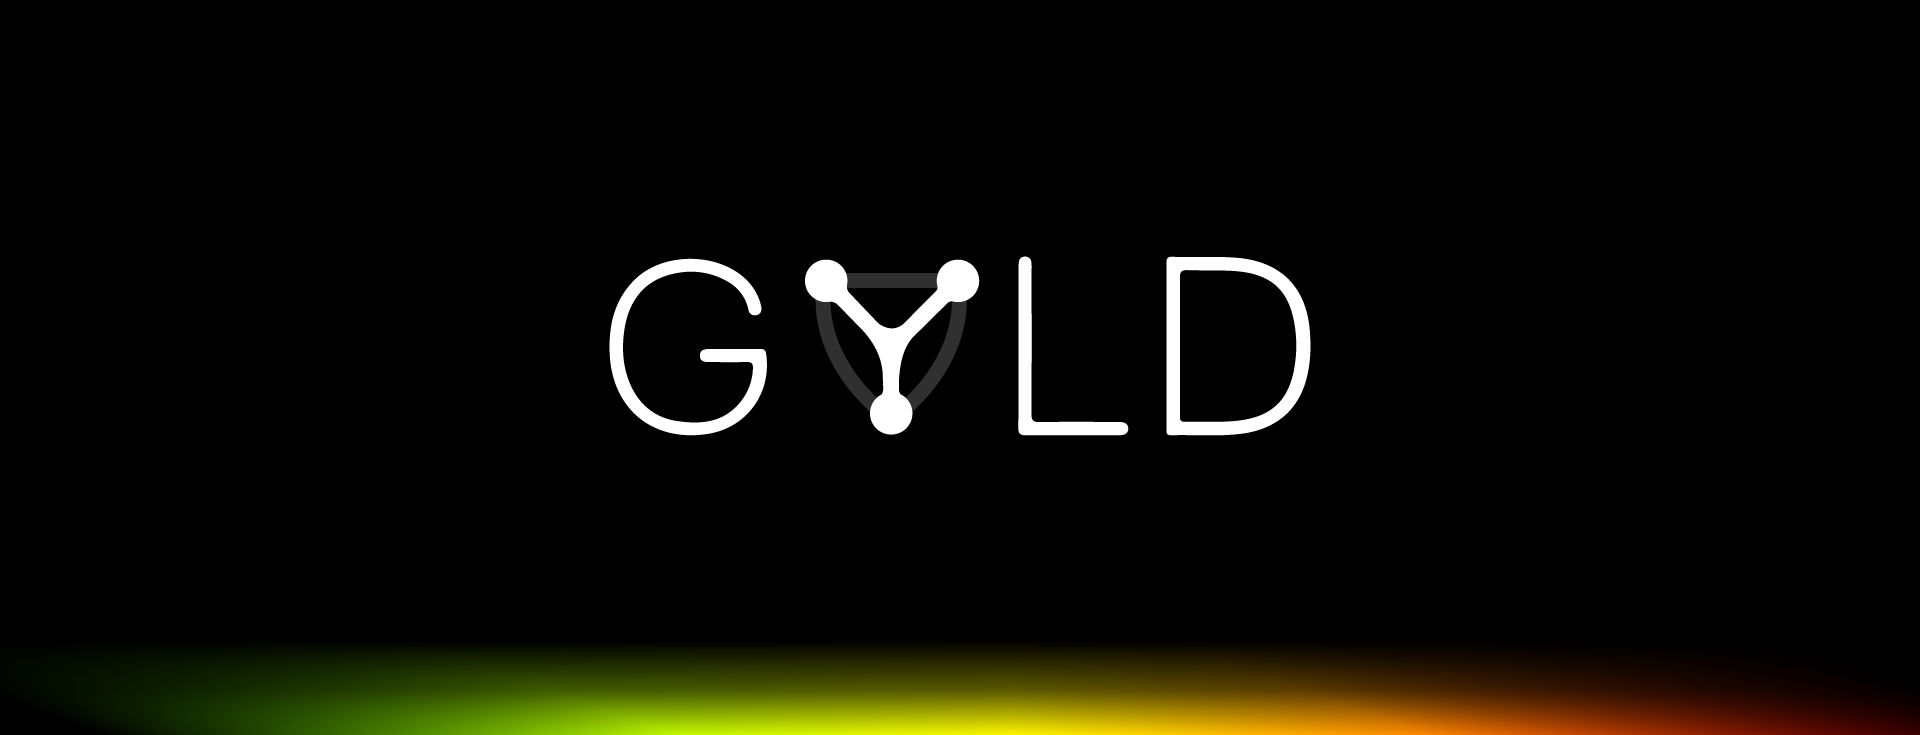 GYLD_1.png